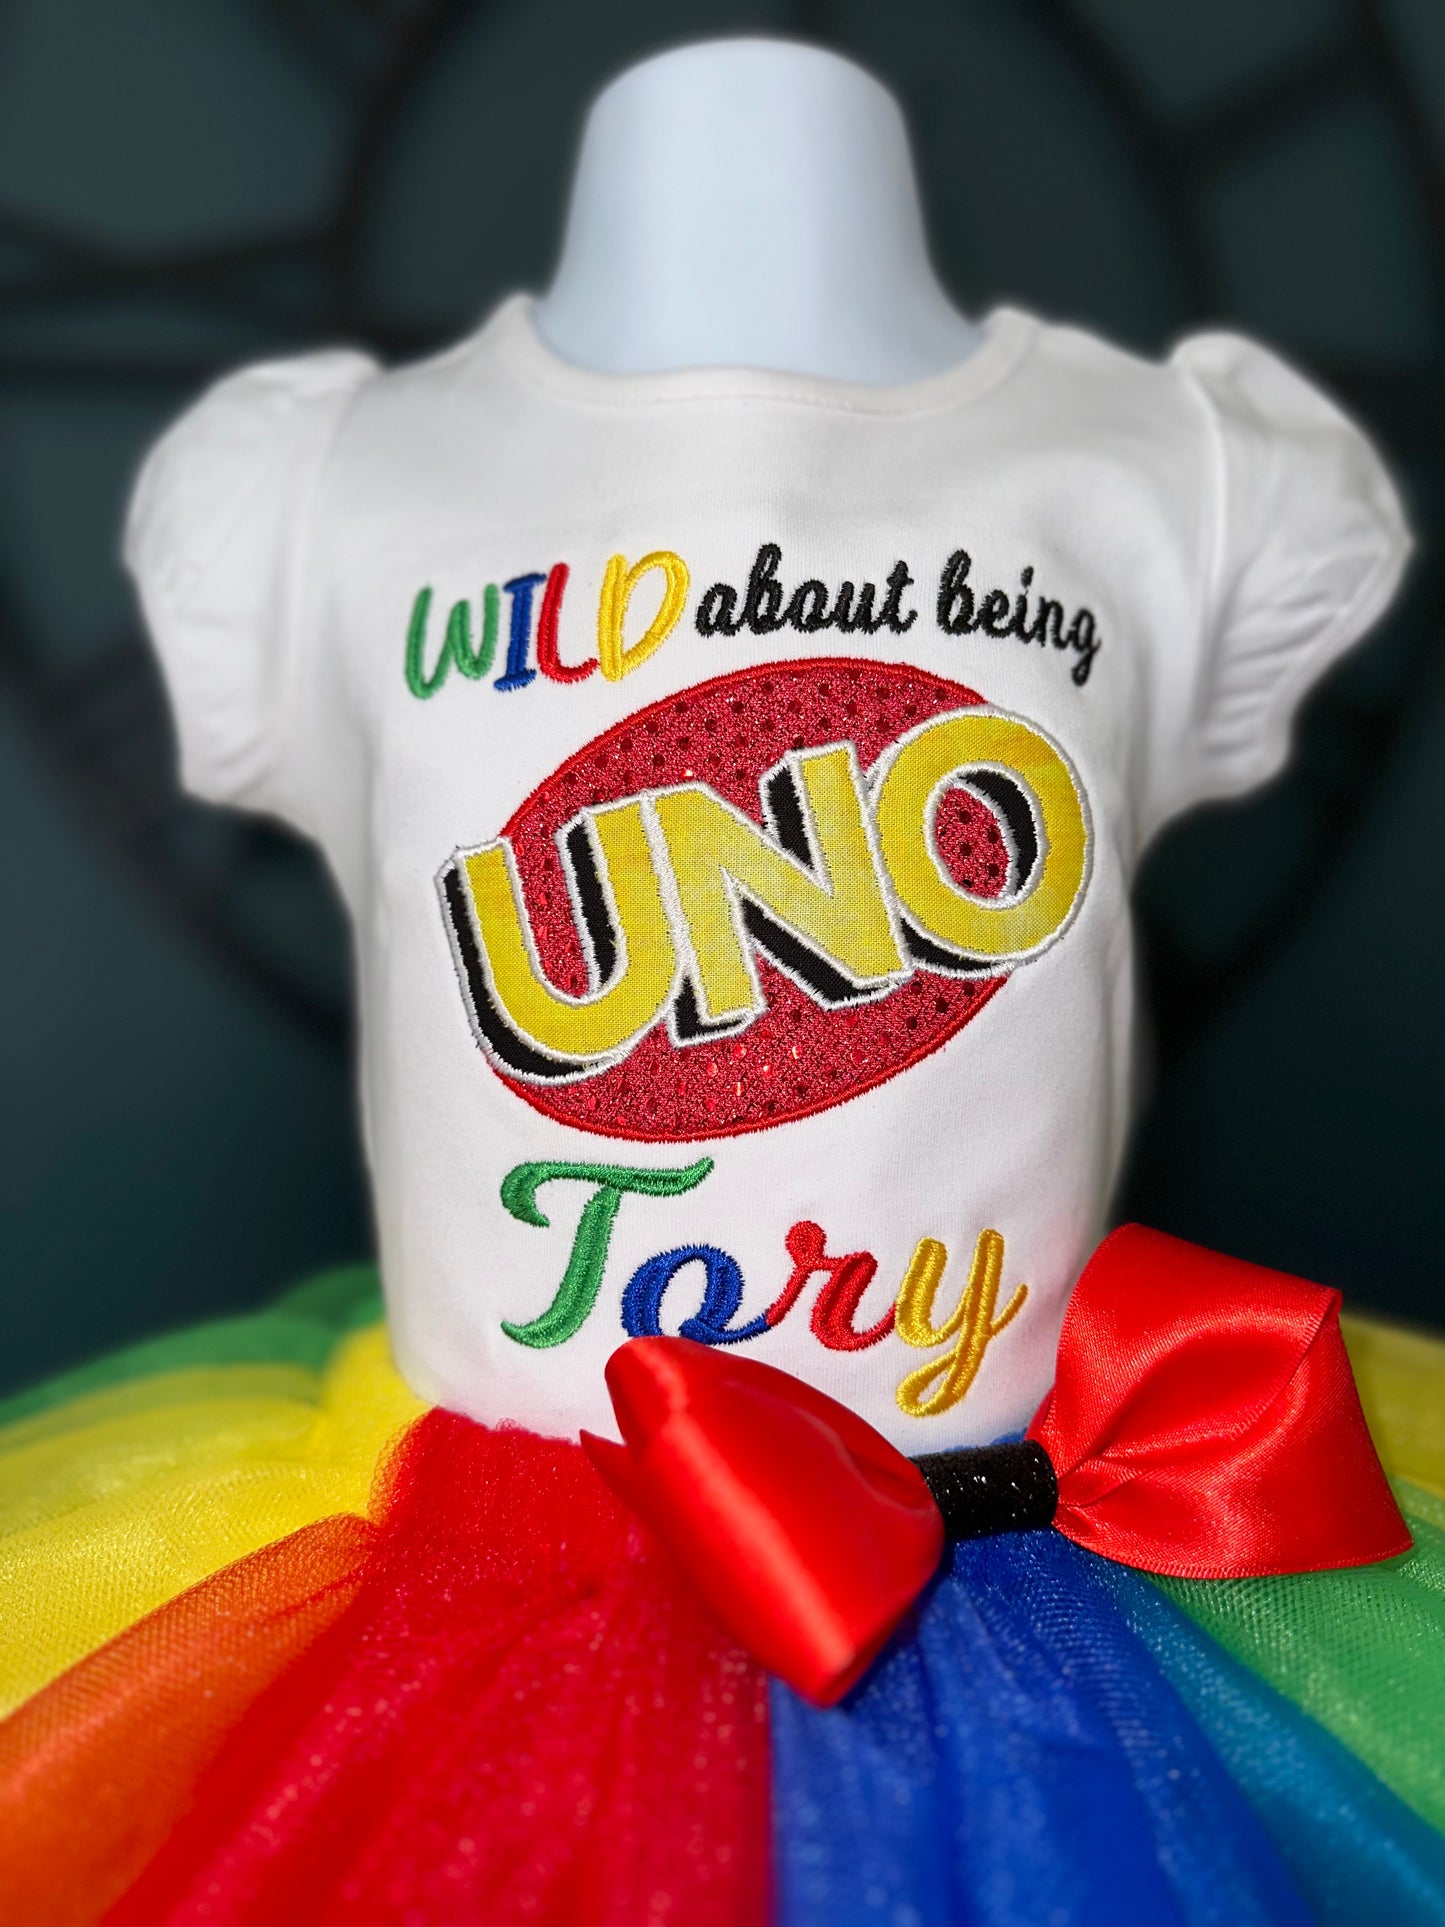 personalized wild about being uno theme outfit, ribbon trimmed red, blue, green, and yellow tulle skirt with red waist bow. embroidered white shirt with uno theme logo